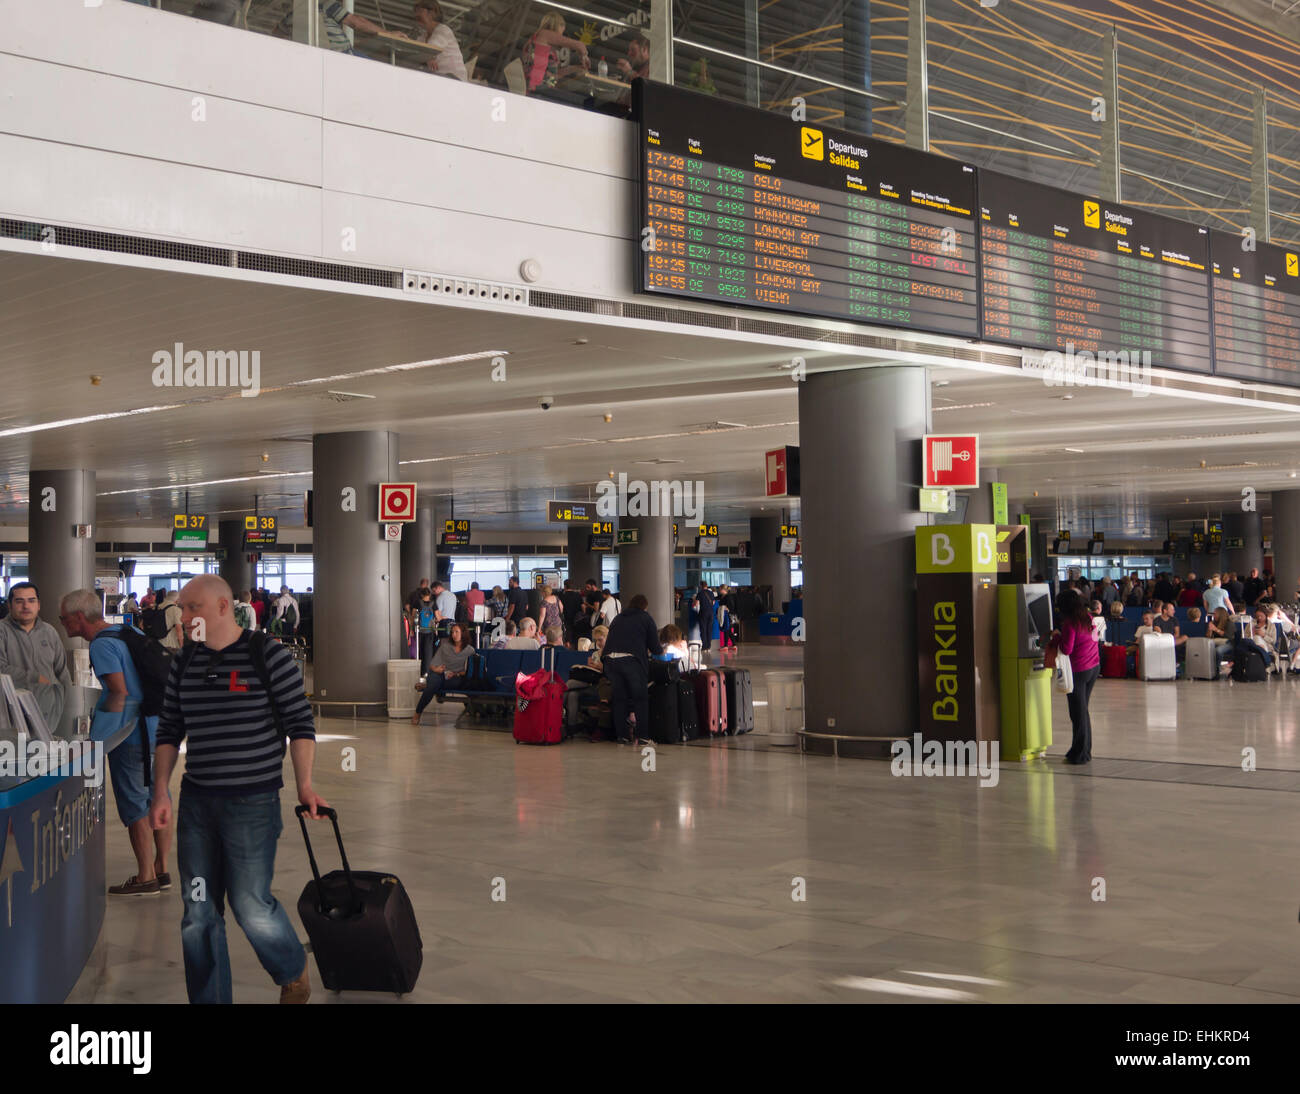 Fuerteventura airport, Canary Islands Spain, departure hall with information board and gates Stock Photo